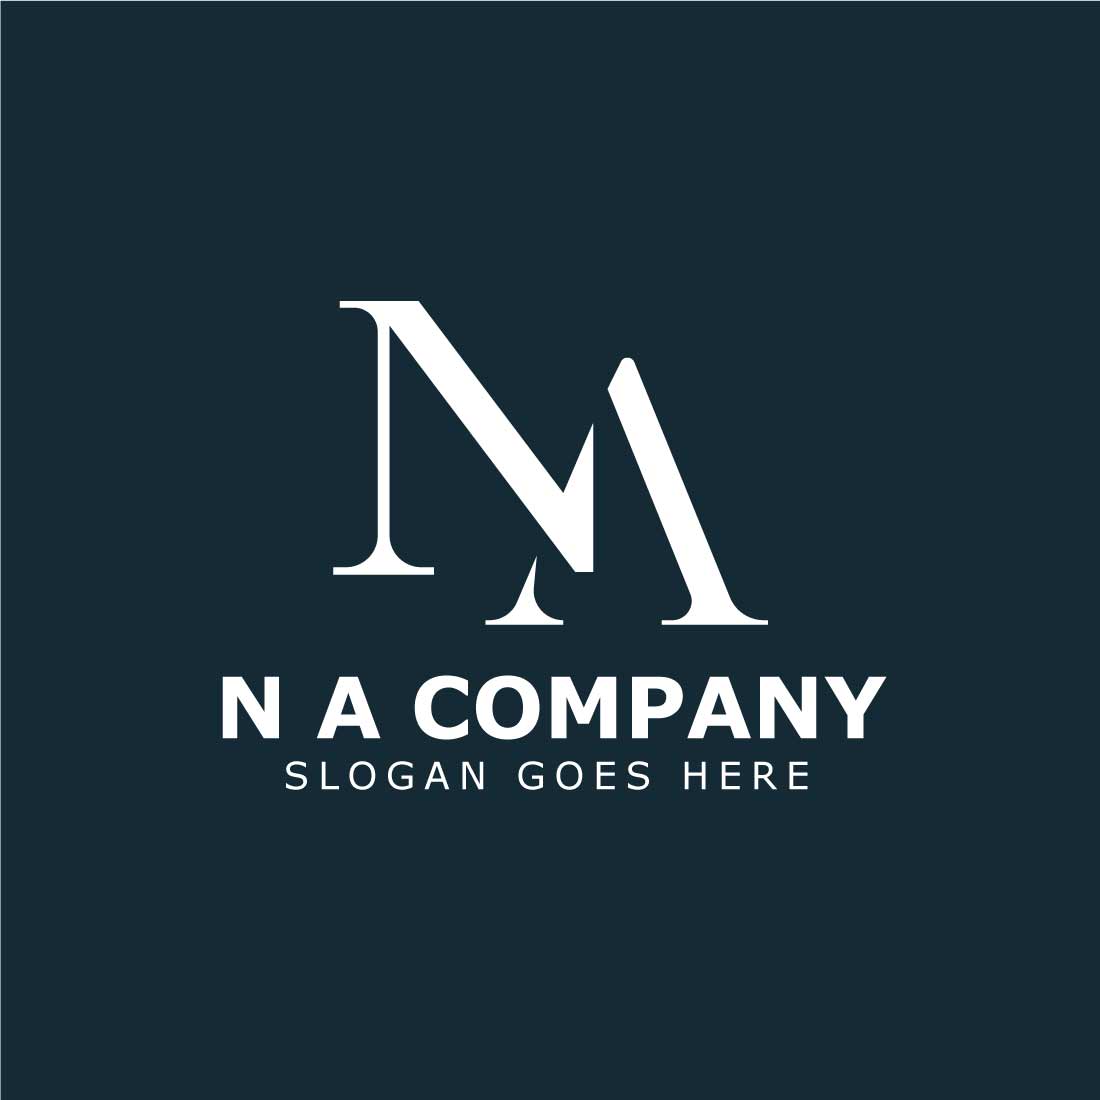 N A logo letter design on luxury background preview image.